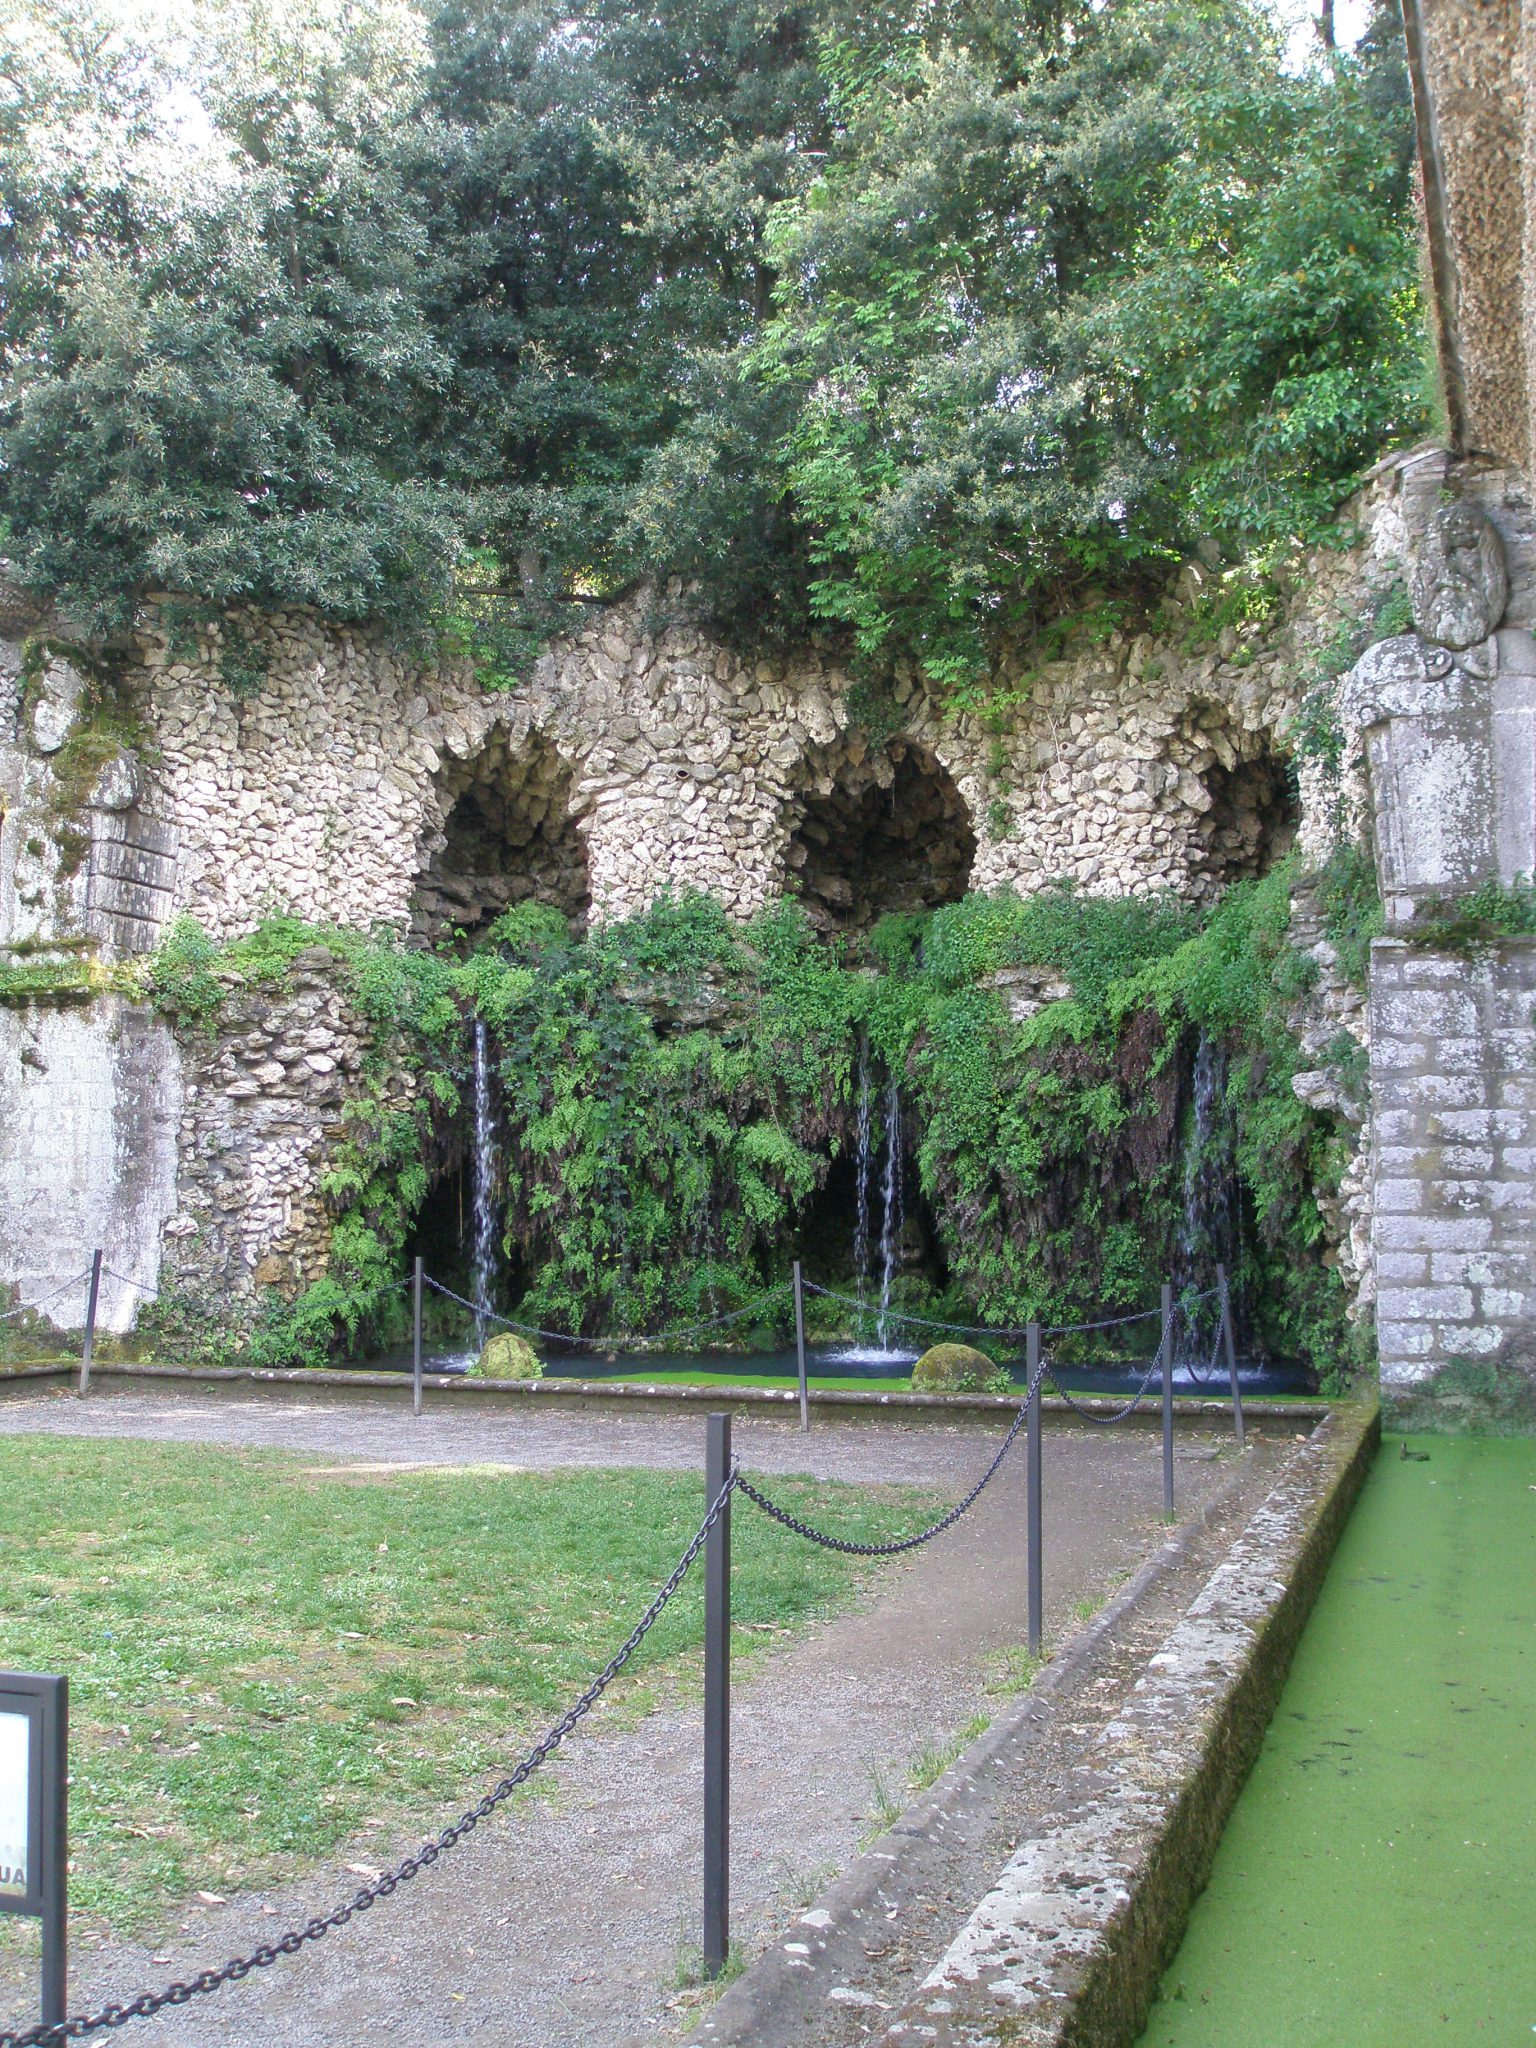 The Grotto of the Fountain of the Deluge. The water supply for the entire Garden issues from the Grotto.